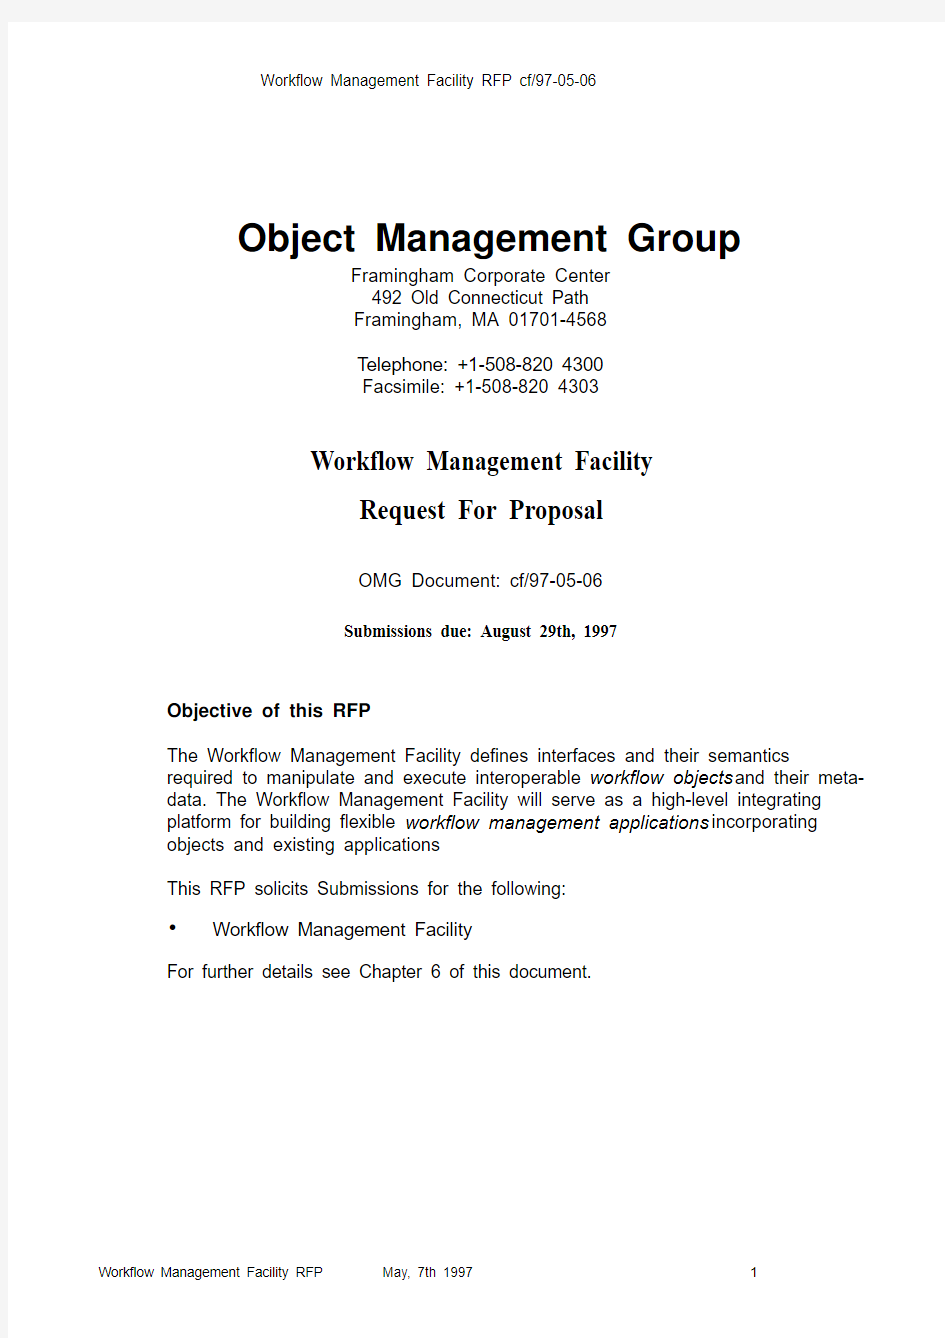 Workflow Management Facility Request For Proposal